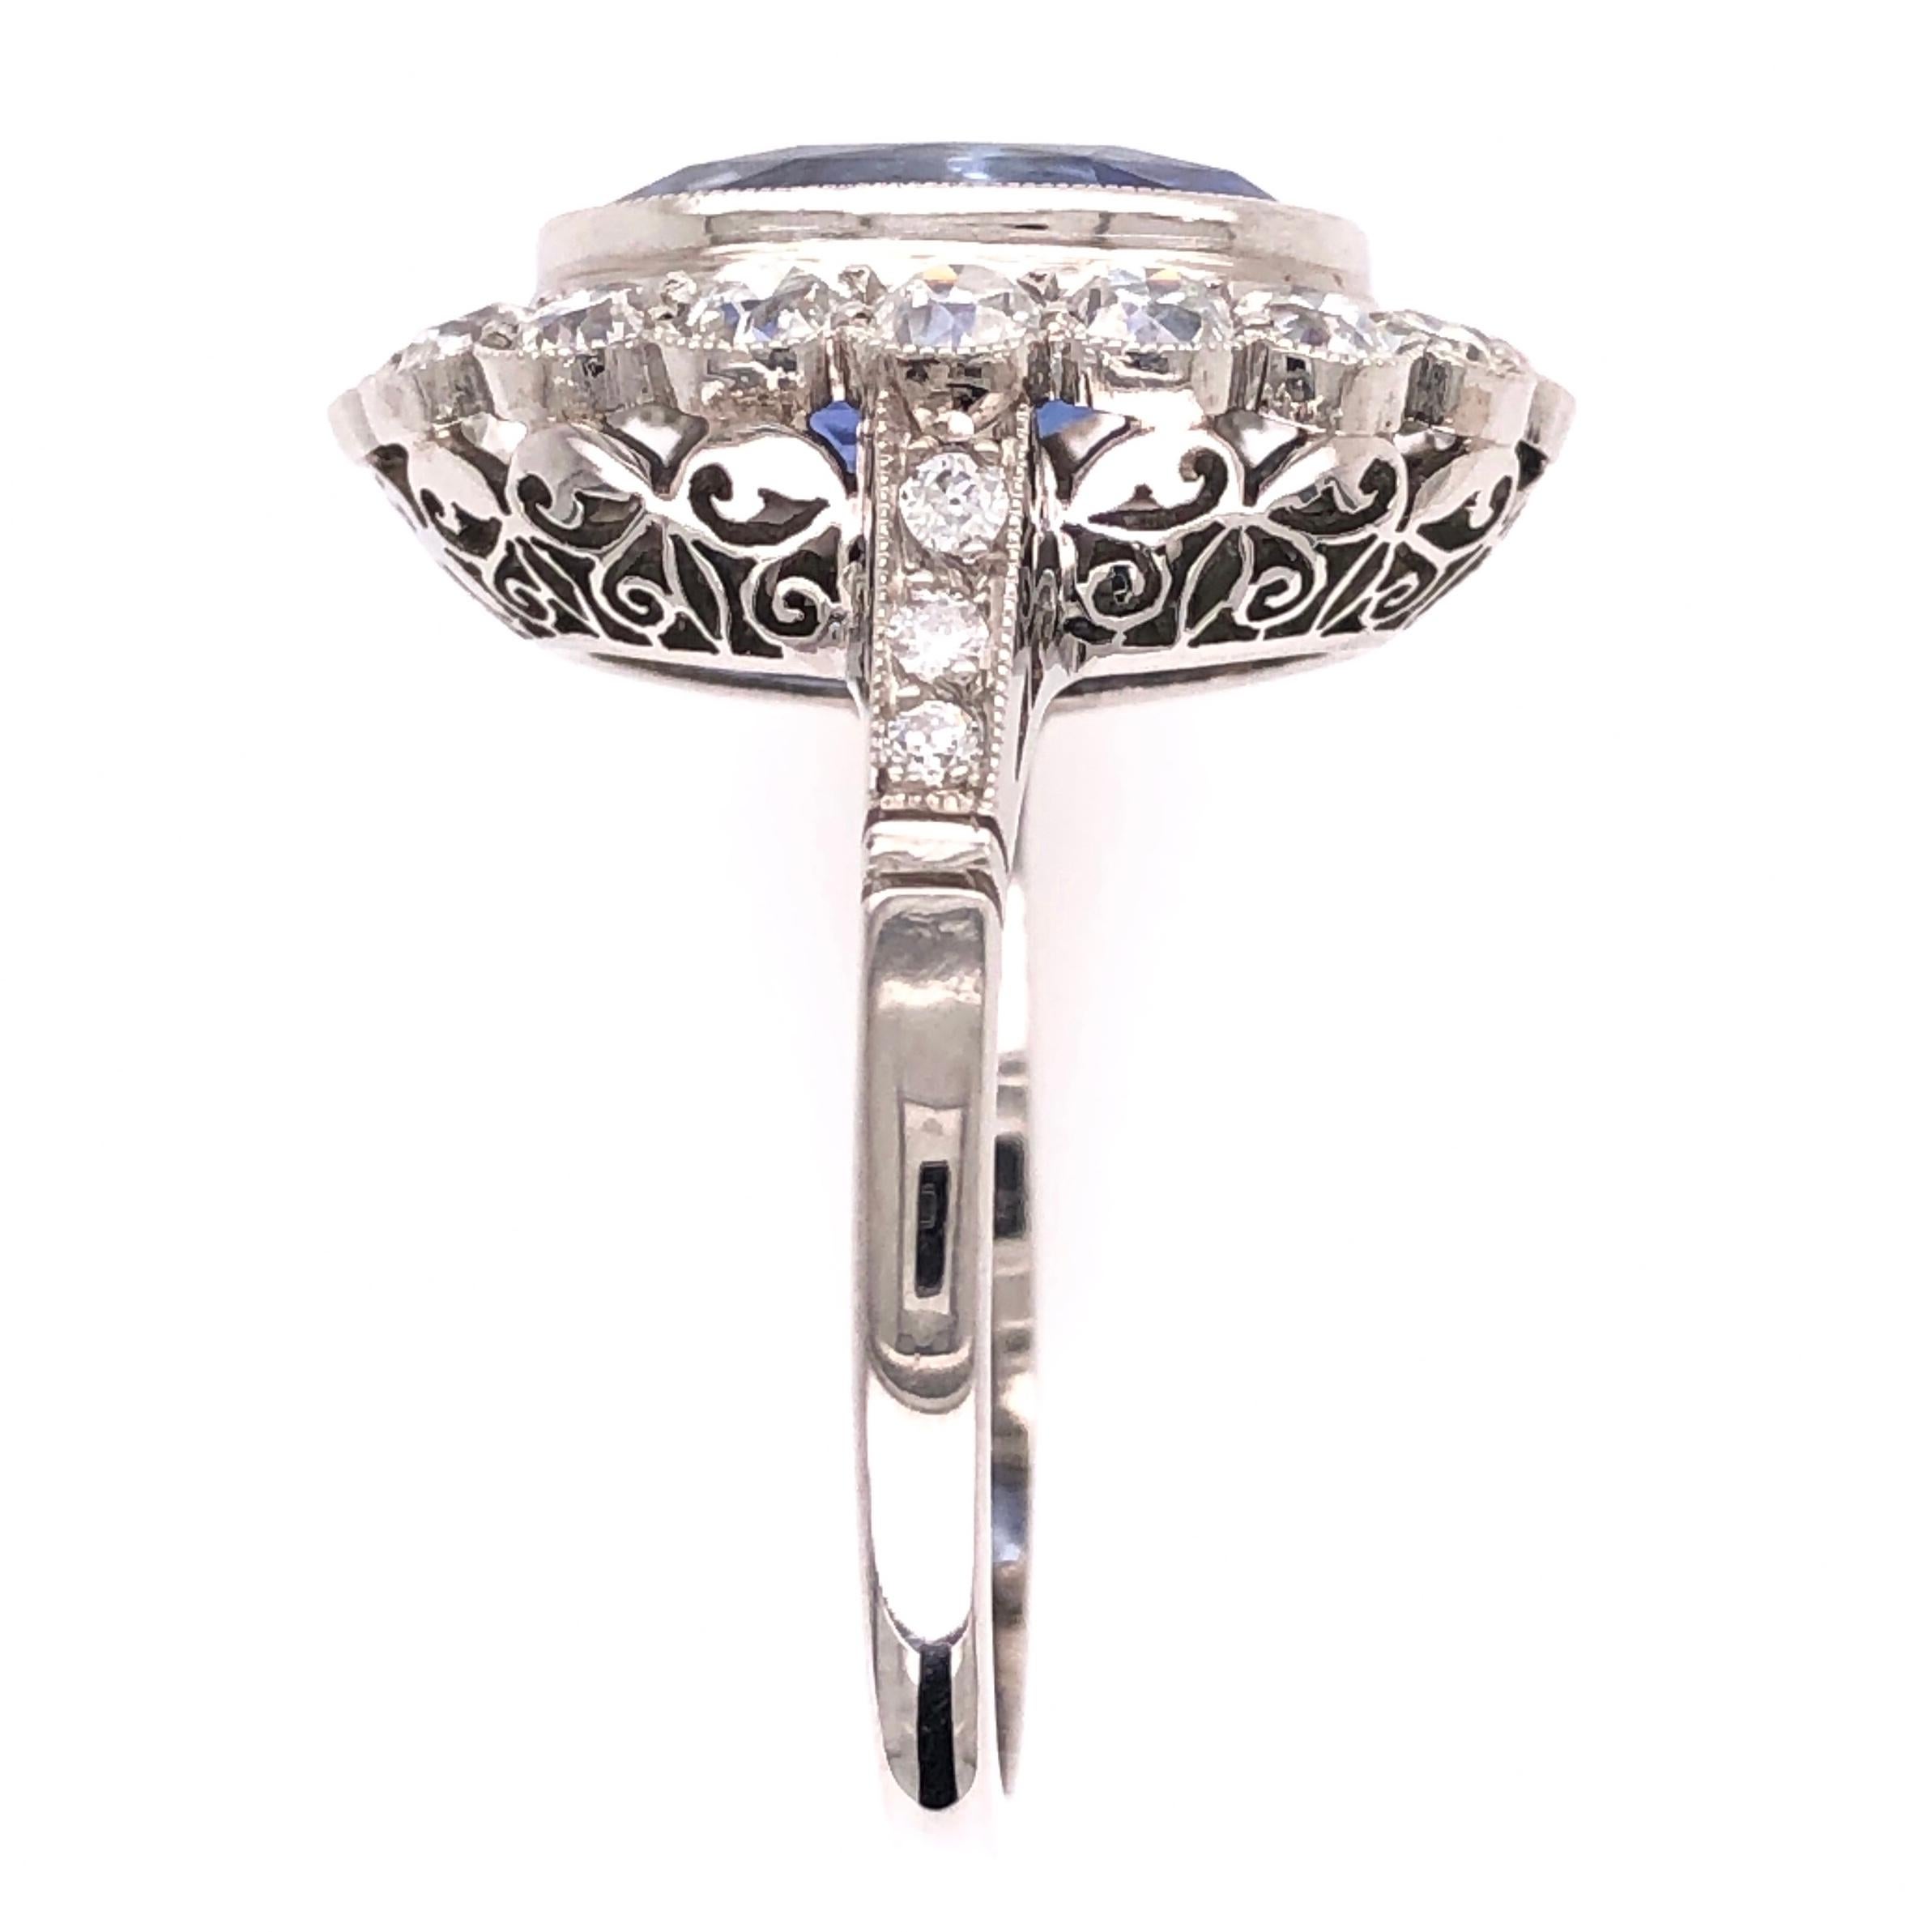 Beautiful, Elegant & finely detailed Art Deco Style Platinum Halo Ring, center securely nestled with a NO HEAT Blue Sapphire, weighing approx. 4.07 Carats; surrounded by Diamonds and small Diamonds enhancing the shank; approx. total weight of